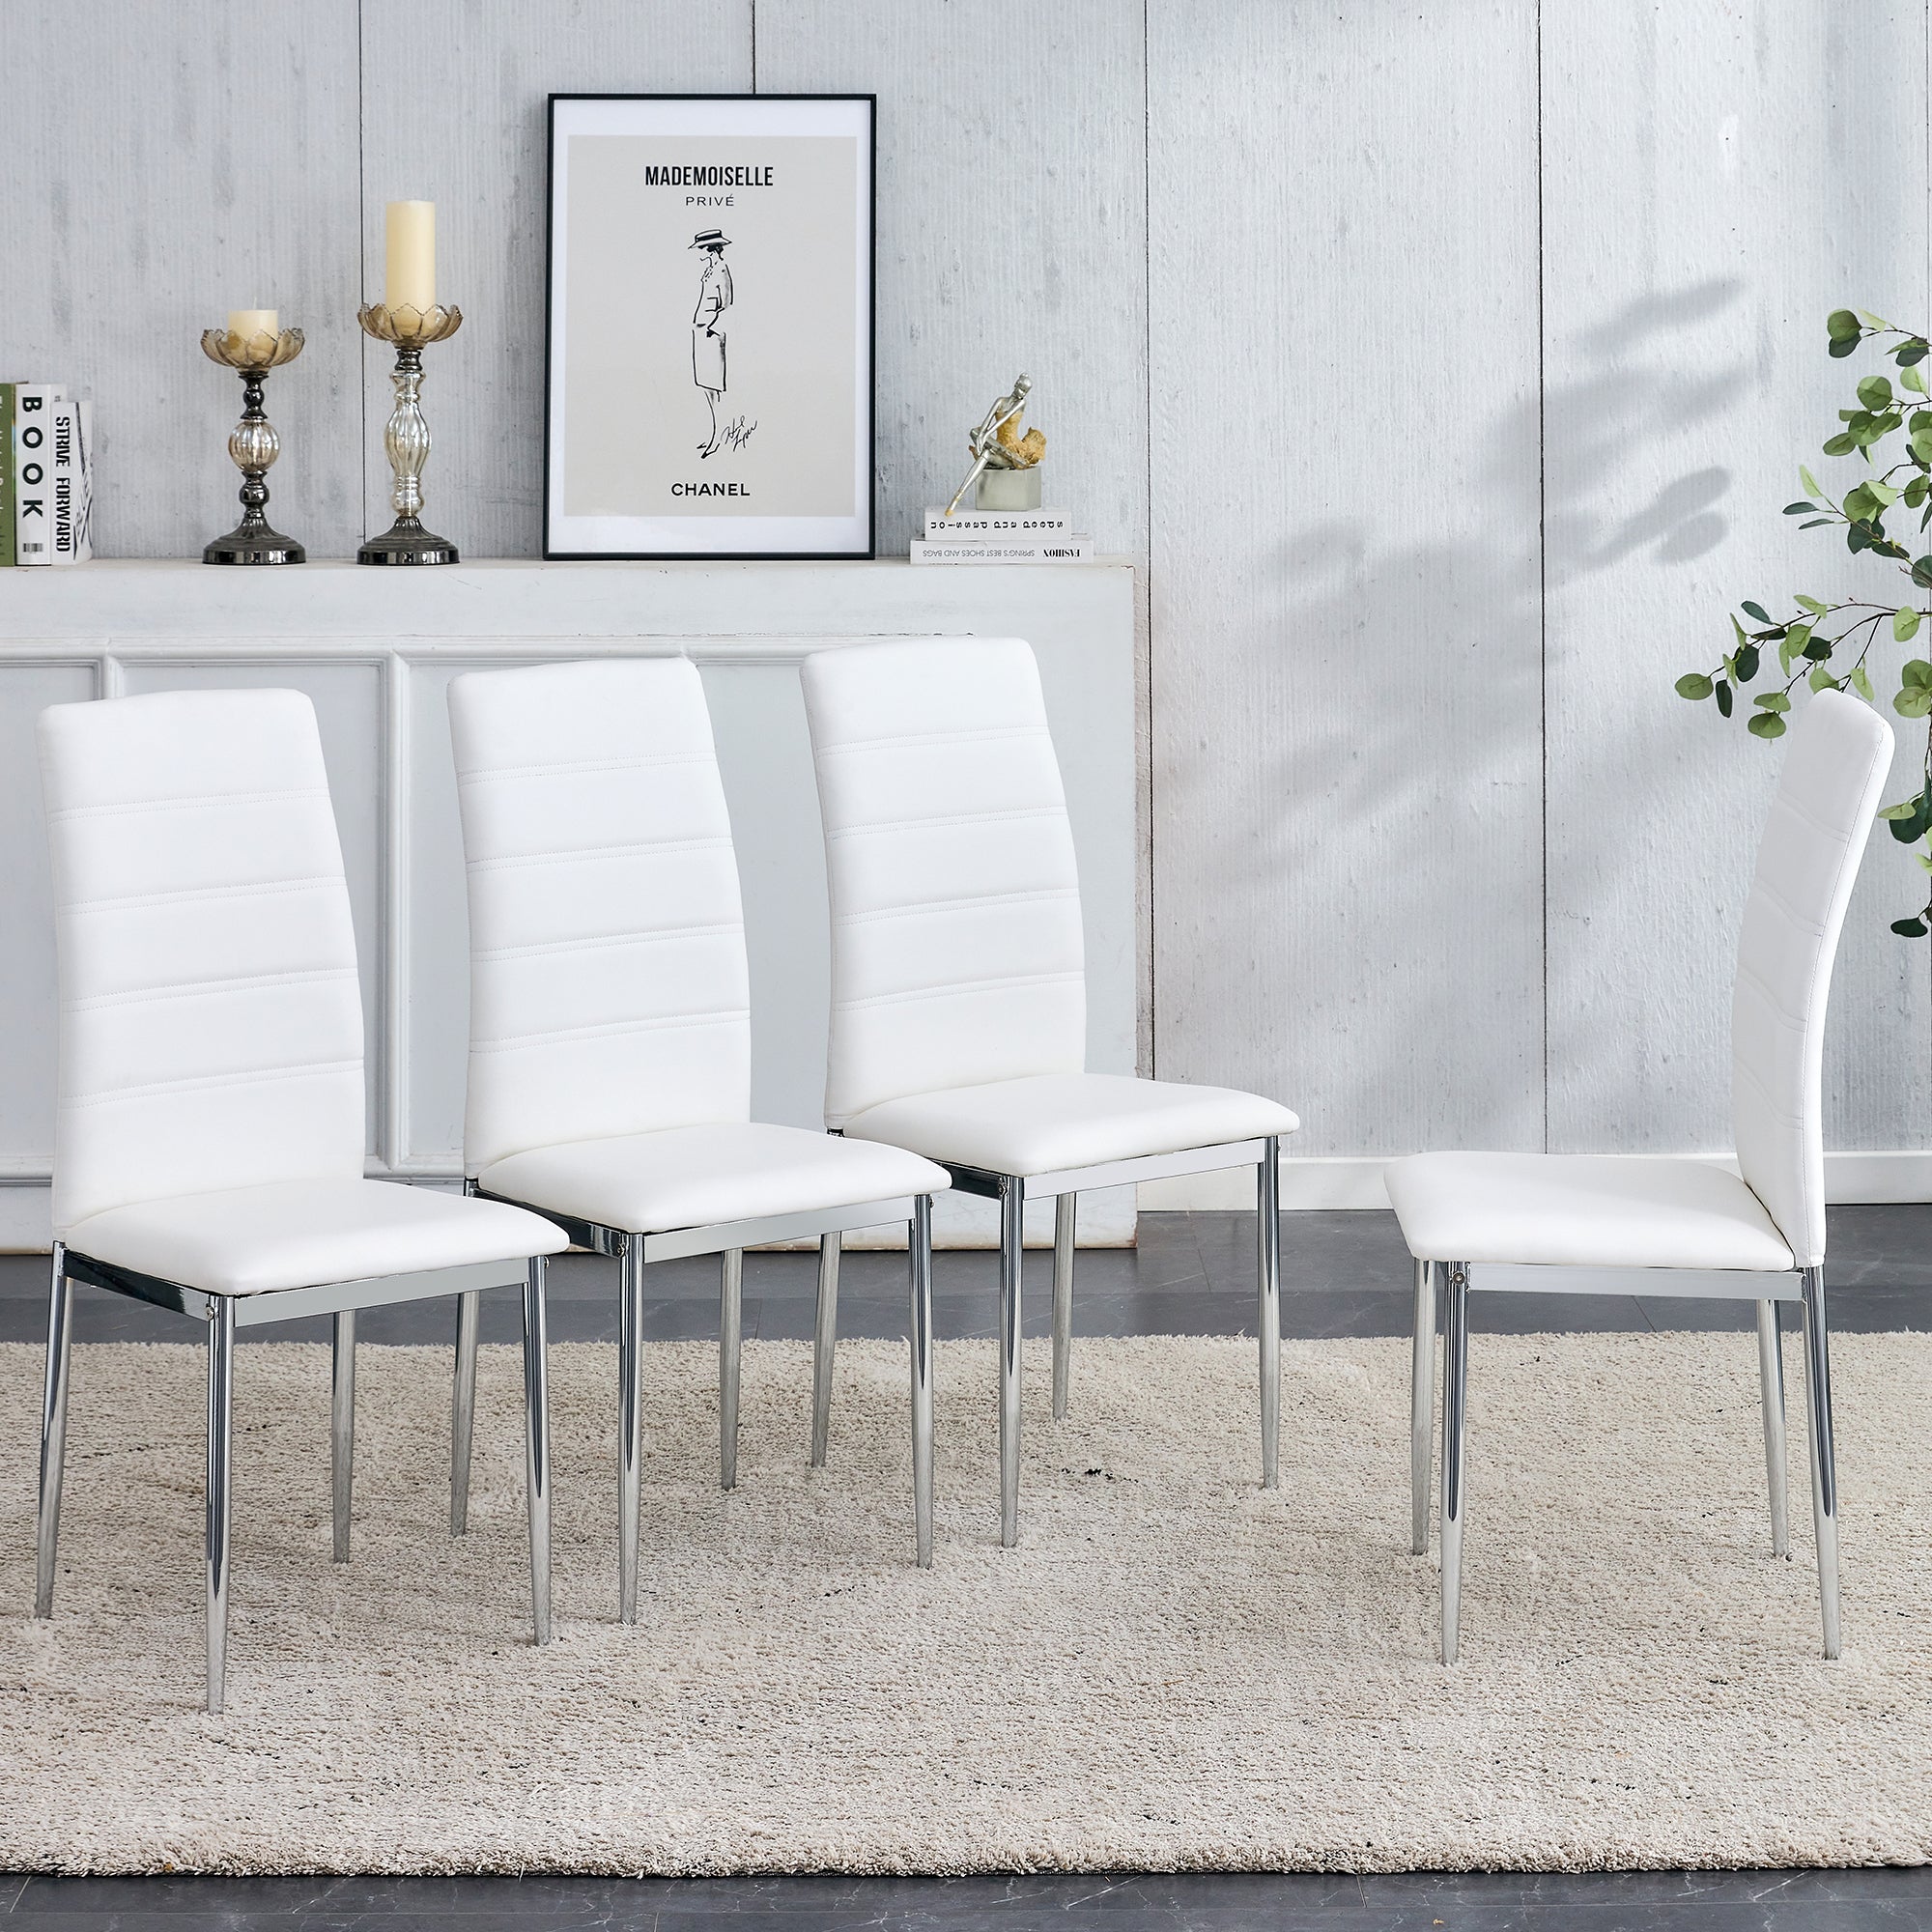 Set of 4 Pieces White Faux leather Dining Chair with Chromed Metal legs